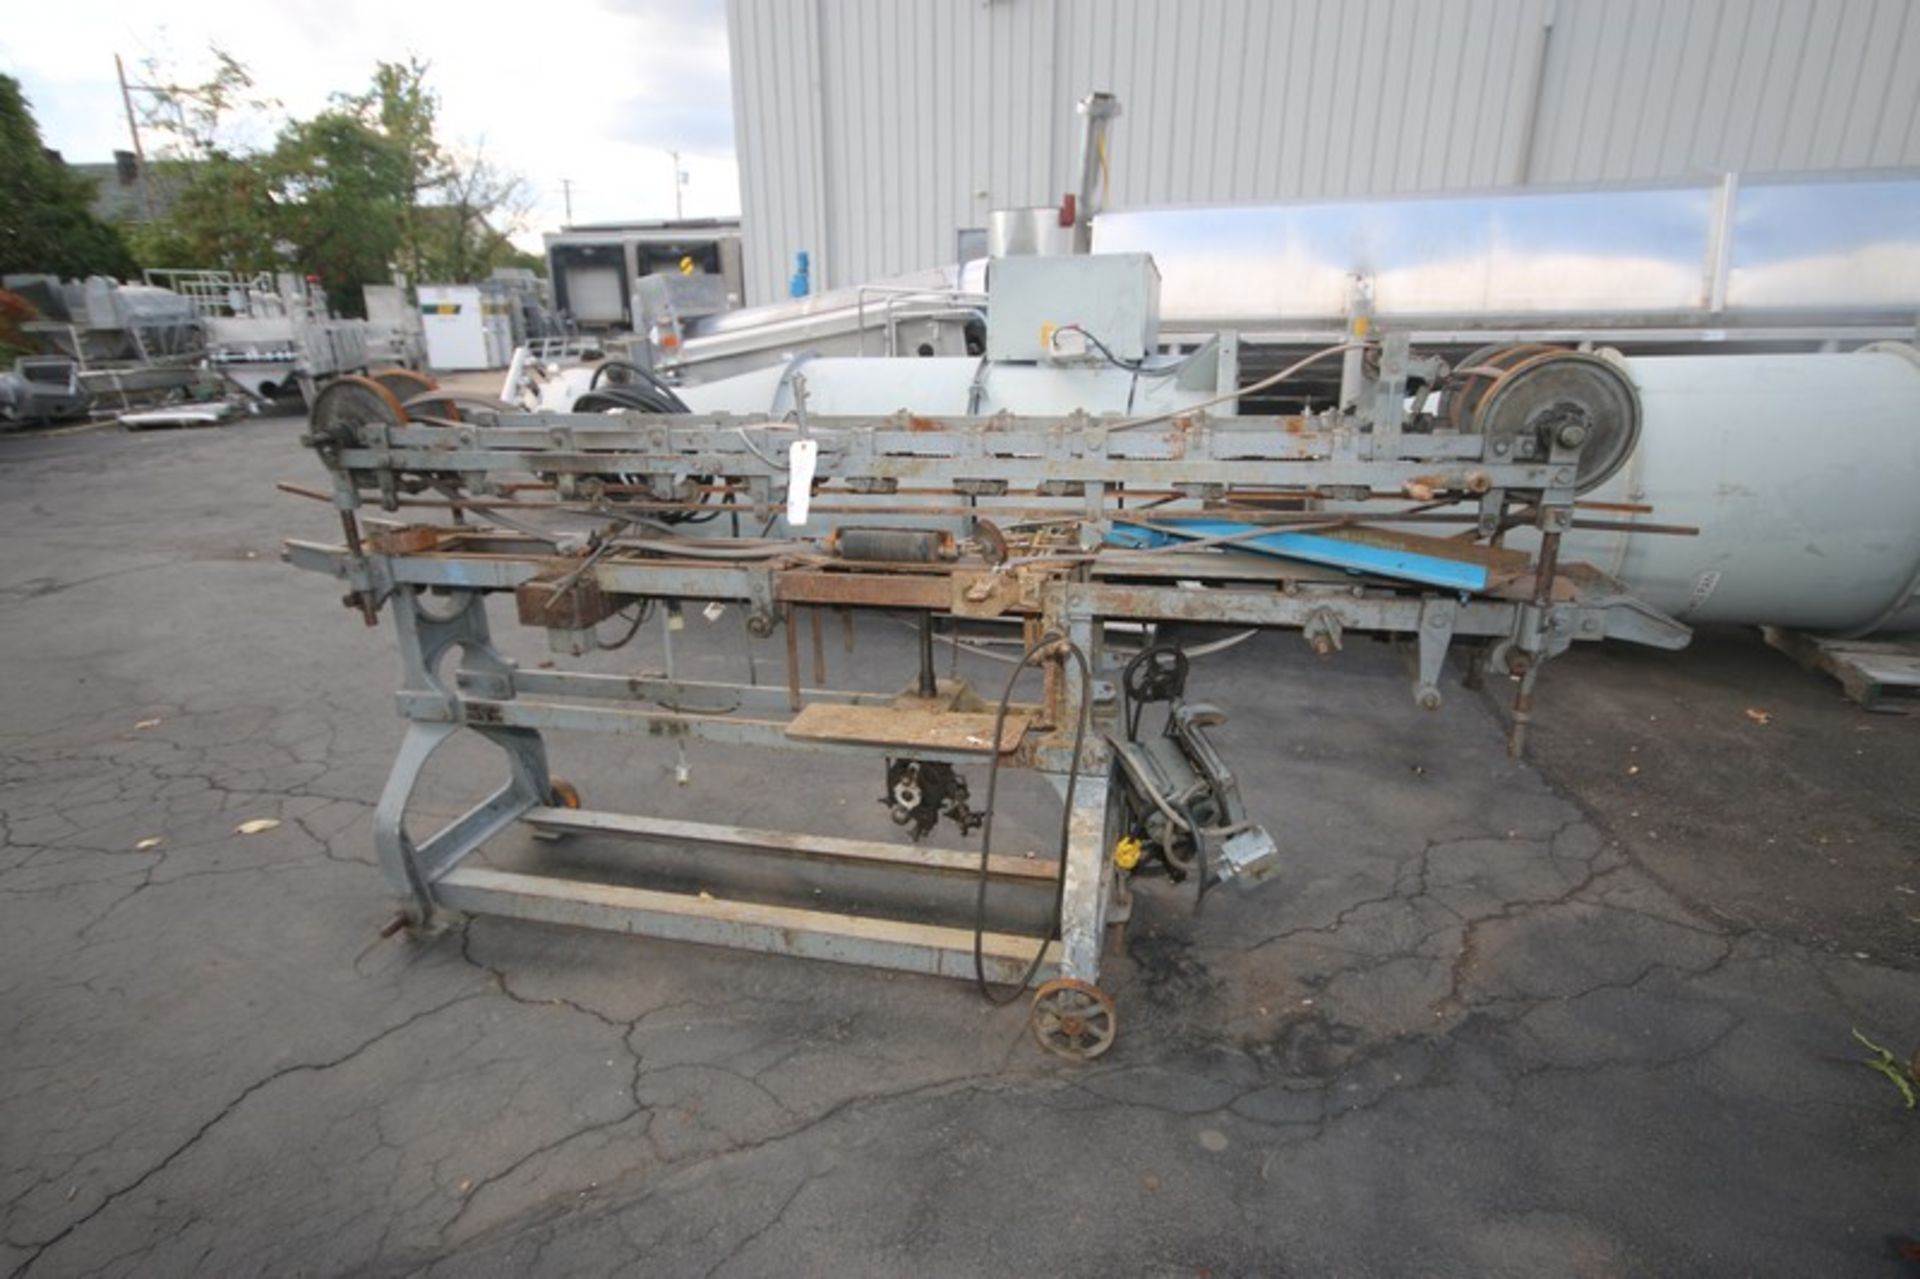 Burt Roll Through Labeling Machine, S/N 13005 Possibly Missing Parts (INV#73222) (LOCATED AT MDG